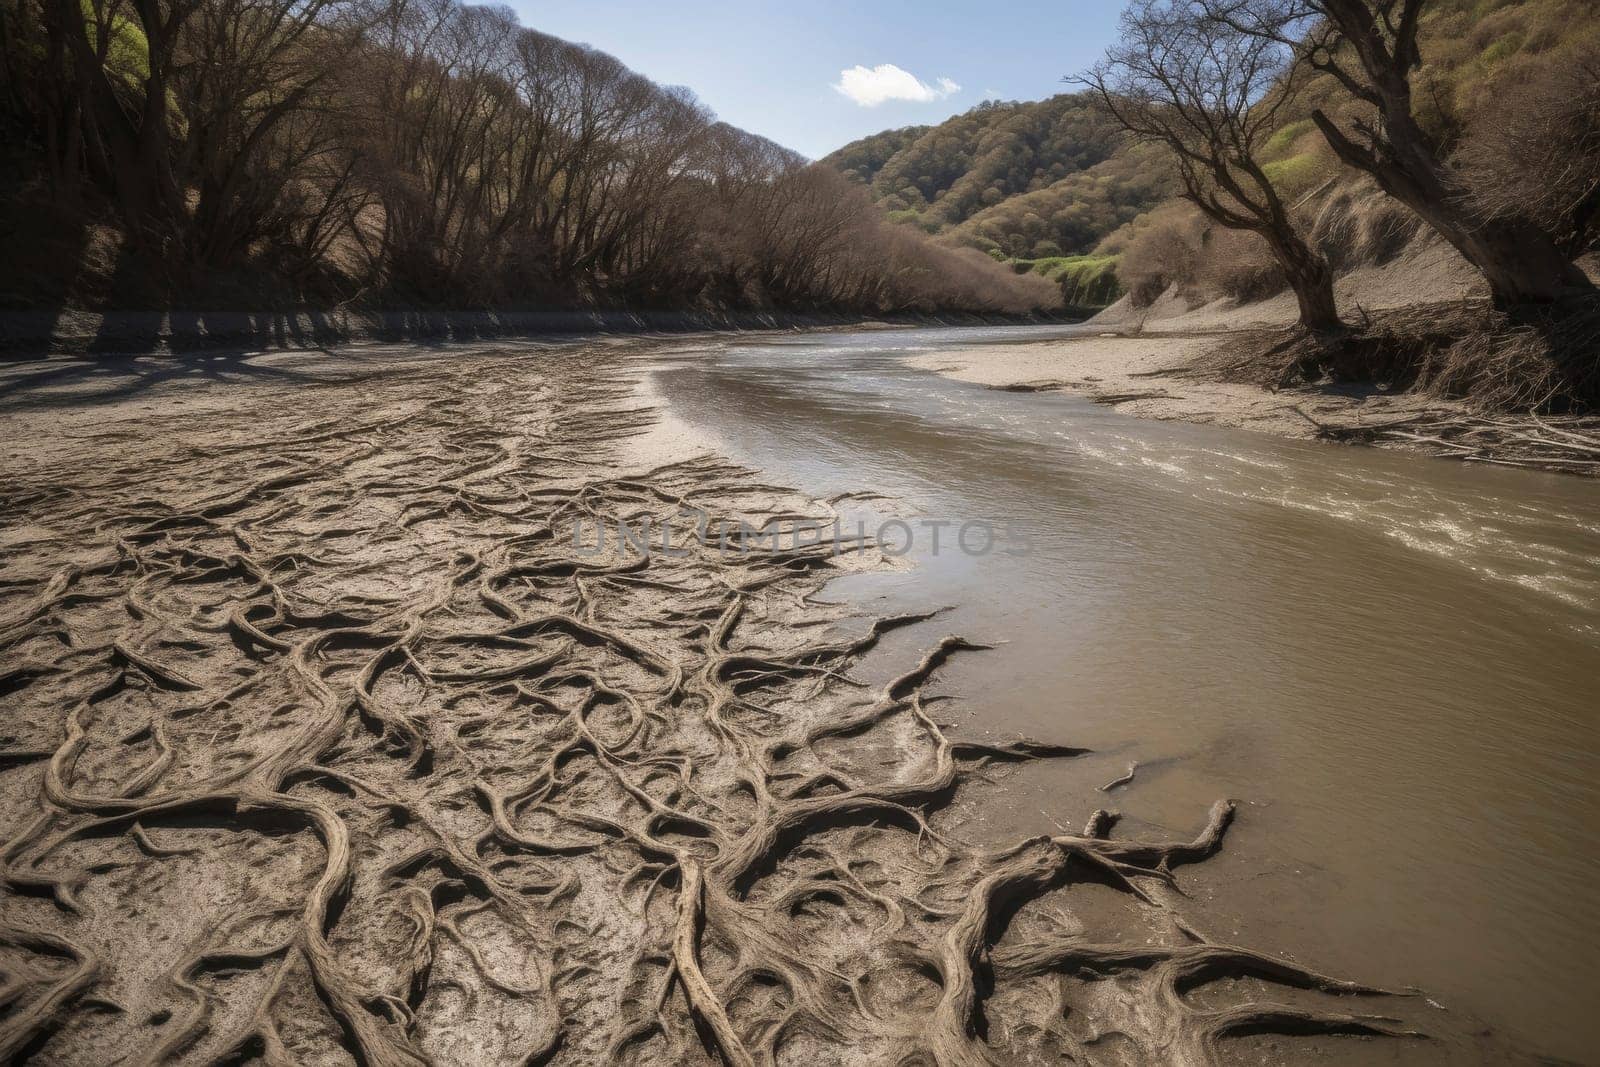 Cracked soil texture in a parched riverbed signifies drought.